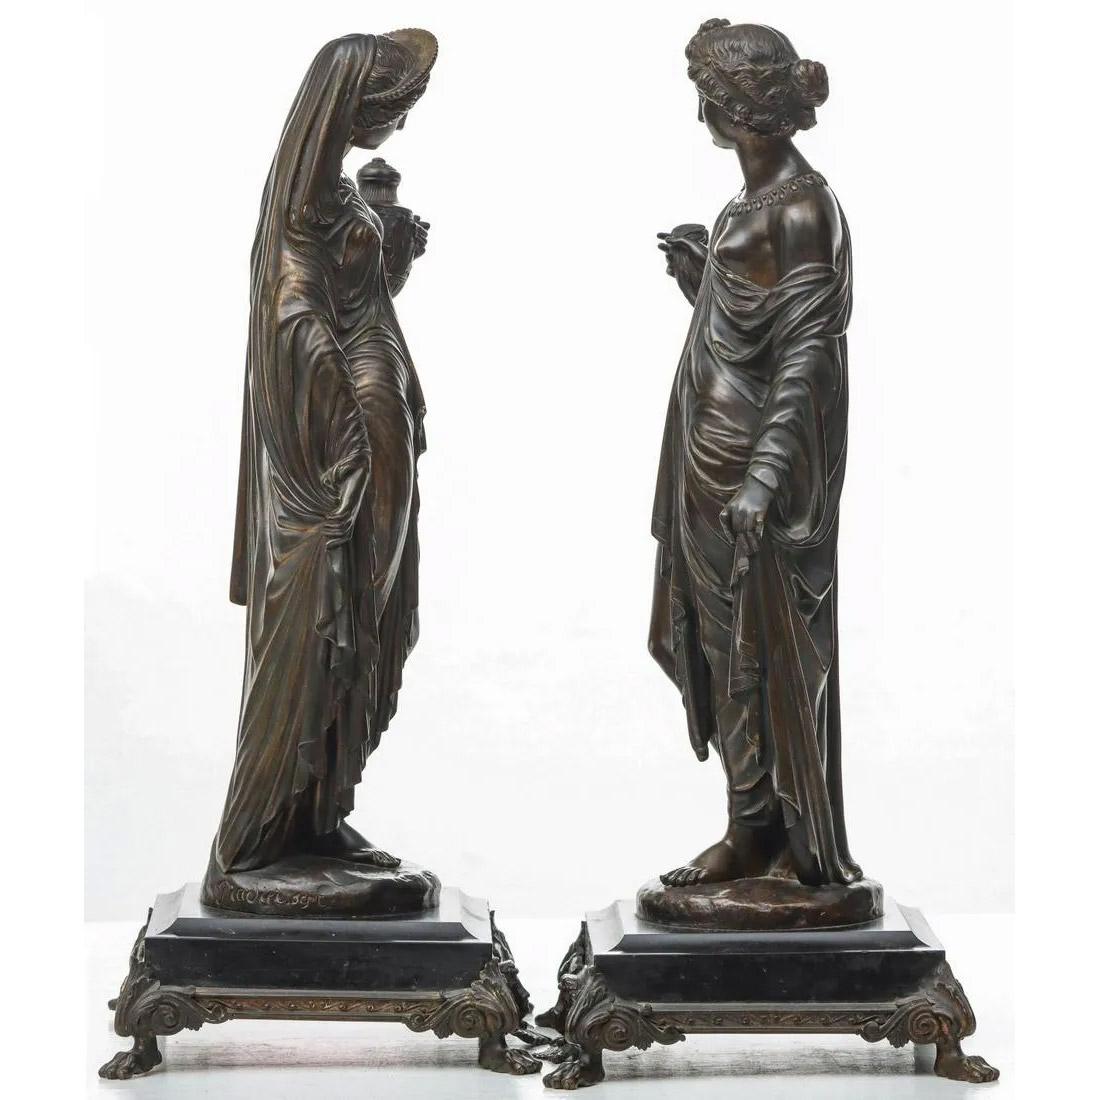 Fine Quality Pair of Neoclassical Patinated Bronze Sculptures - Gold Figurative Sculpture by Jean Jacques Pradier 